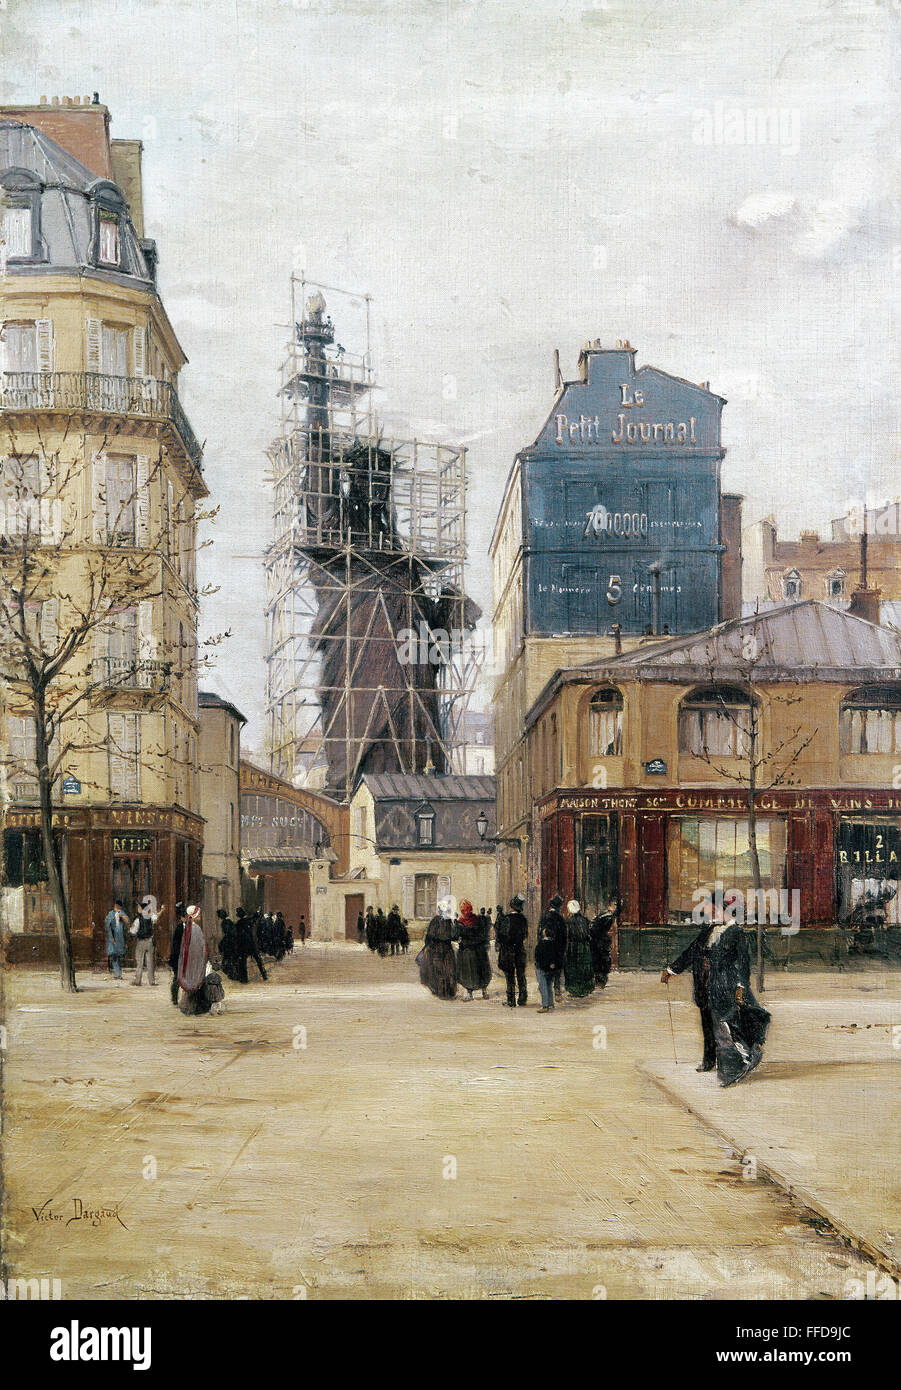 STATUE OF LIBERTY, c1884. /nStatue of Liberty in scaffold outside the Foundry, Rue de Chazelles, Paris, France. Oil on canvas, c1884, by Victor Dargaud. Stock Photo